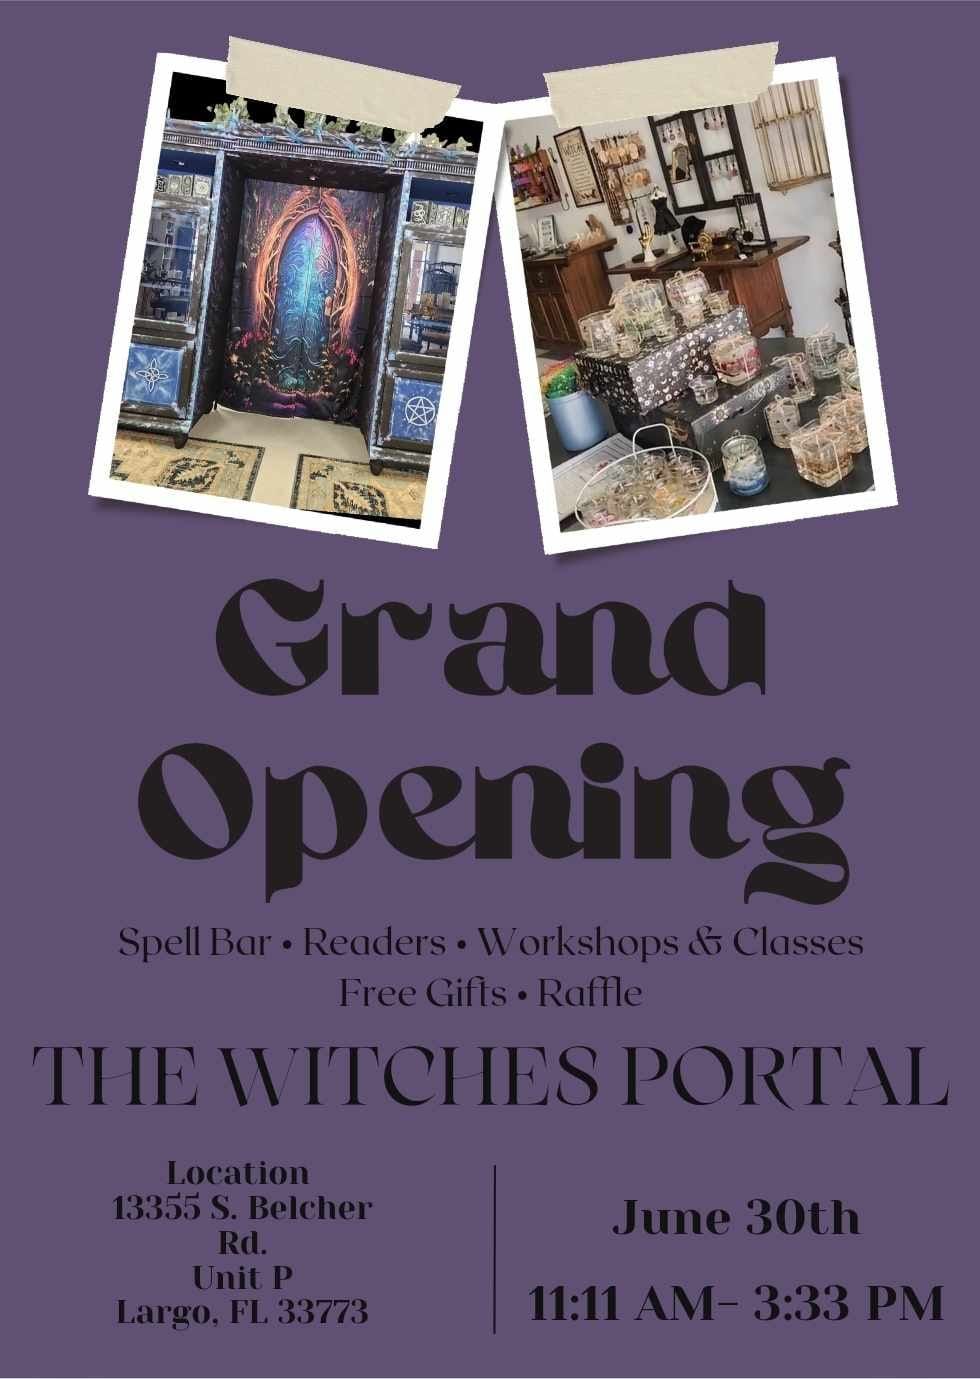 The Witches Portal Grand Opening 